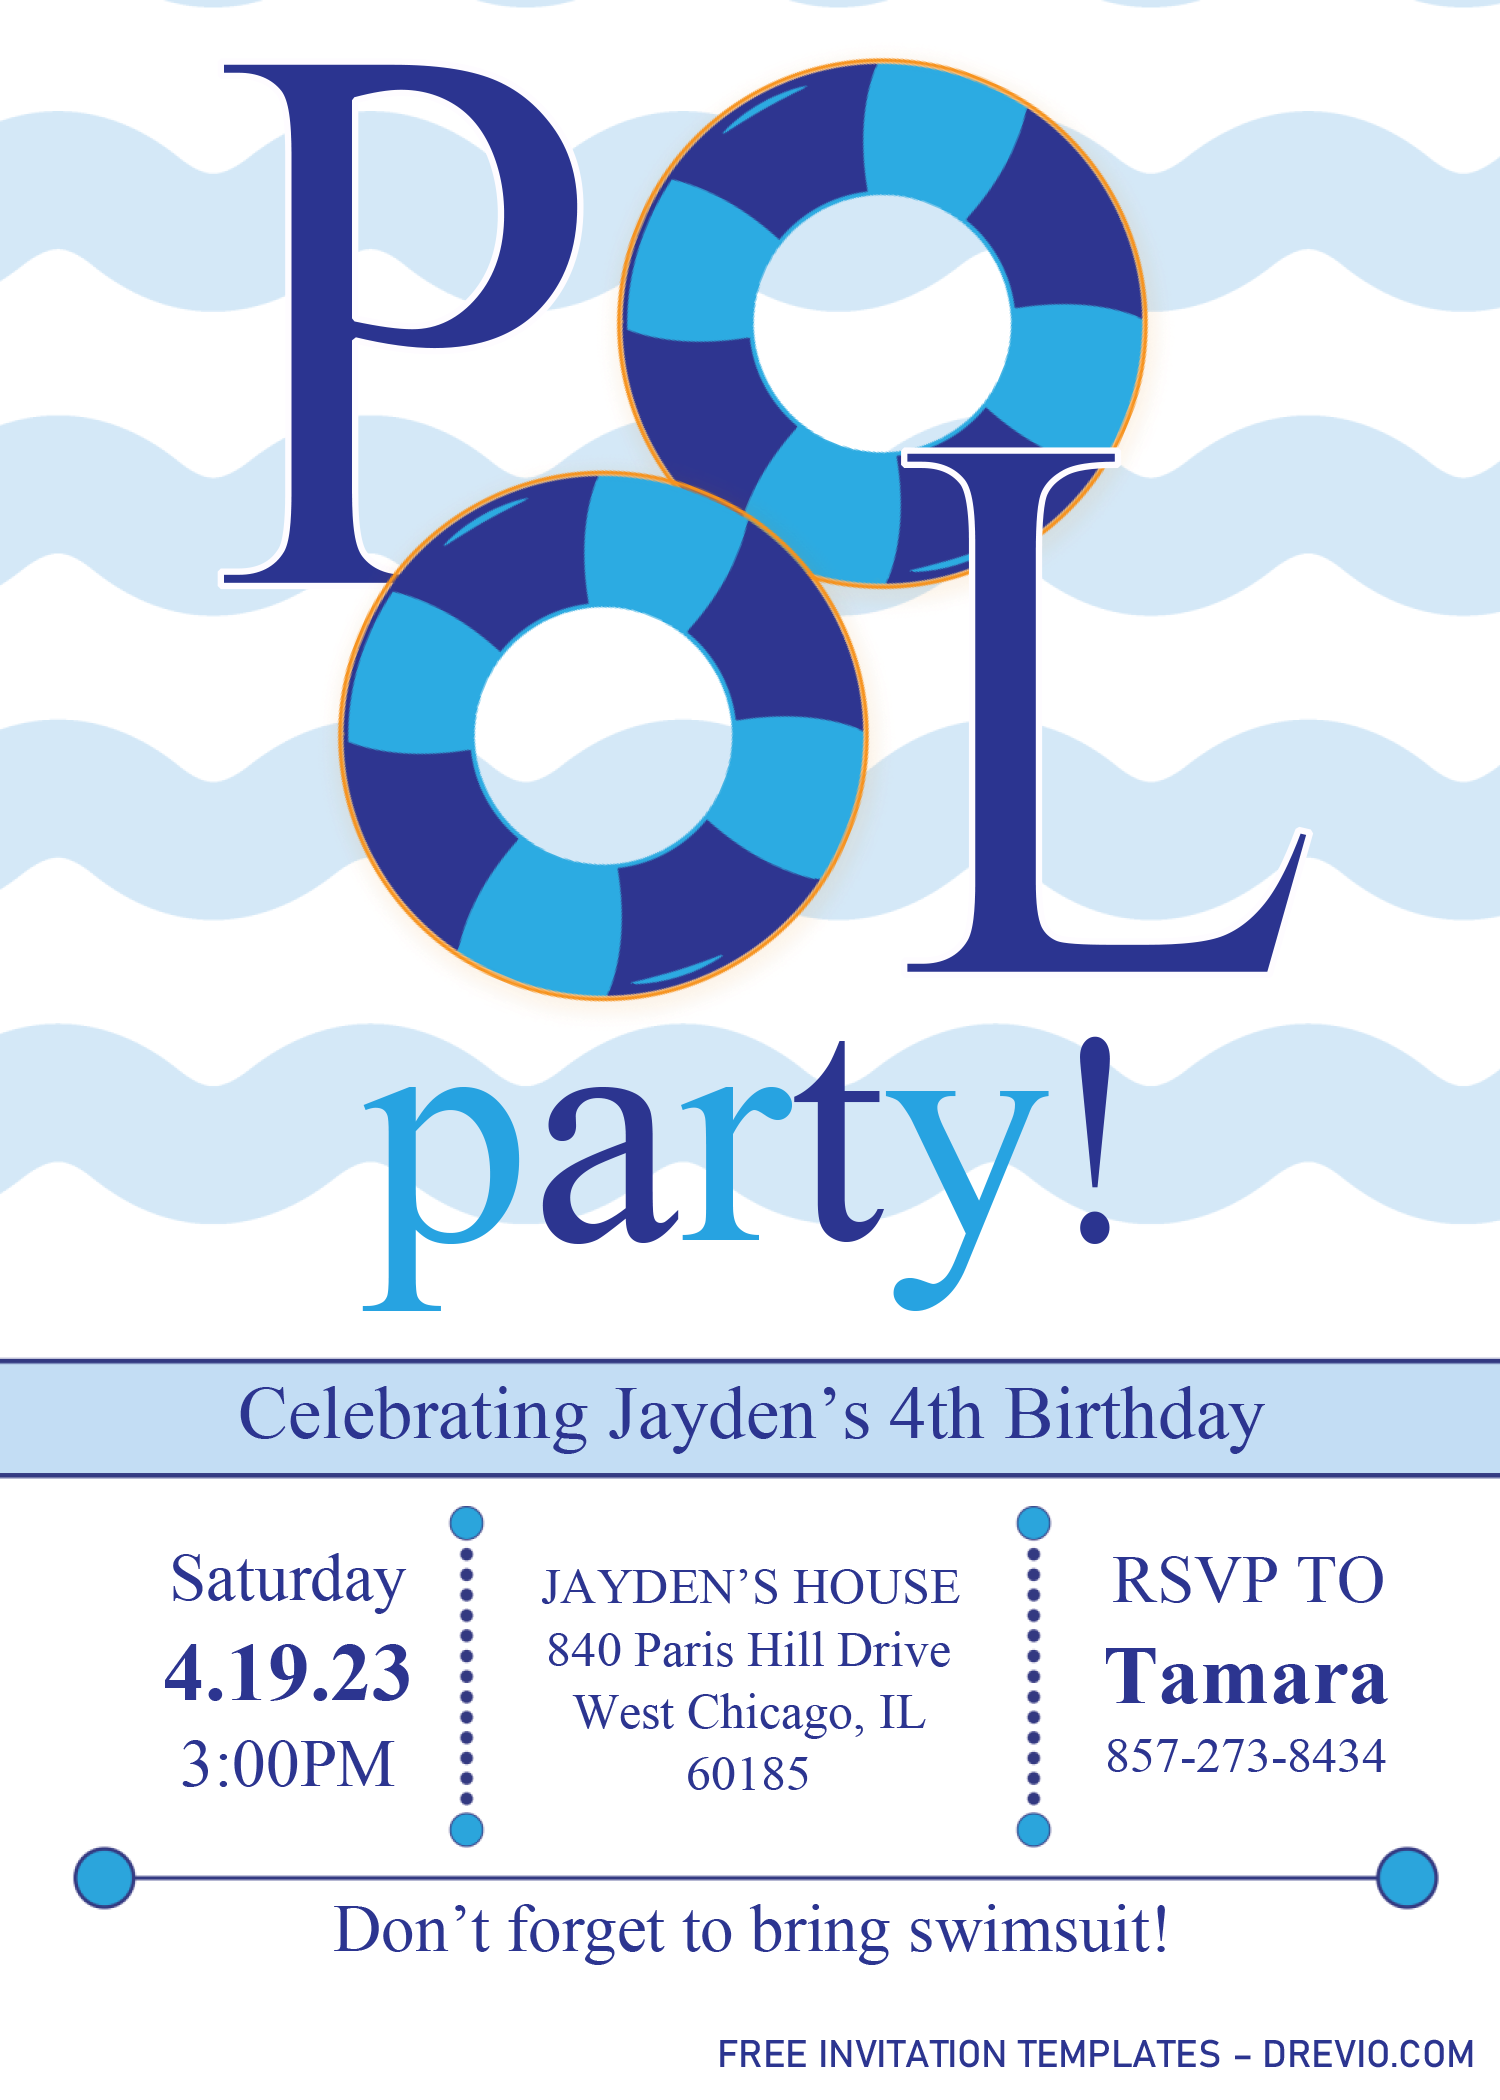 Pool Party Invitation Templates – Editable .Docx | Download Hundreds